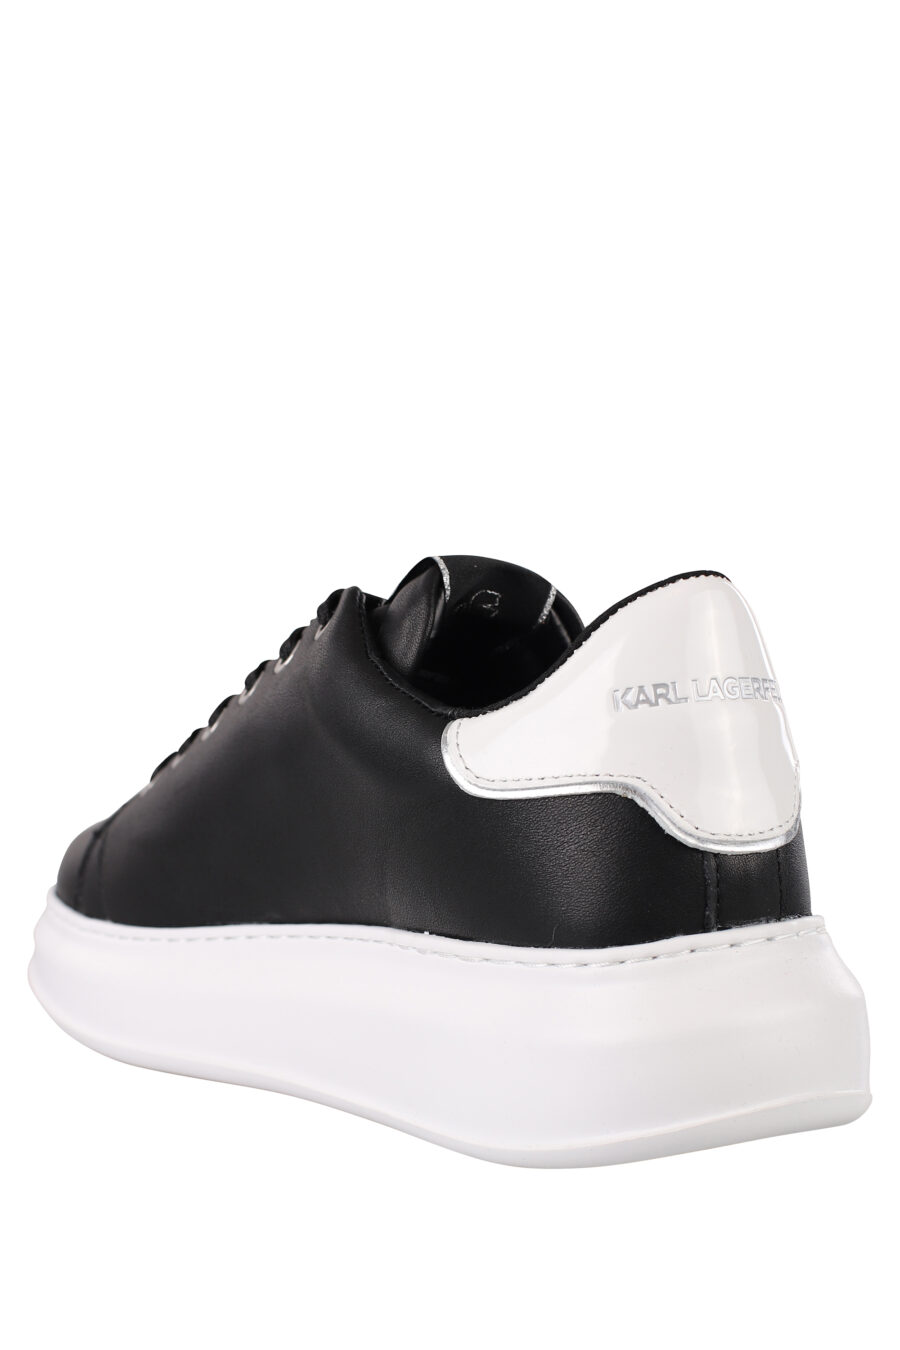 Black trainers with silver metal lettering logo - IMG 1387